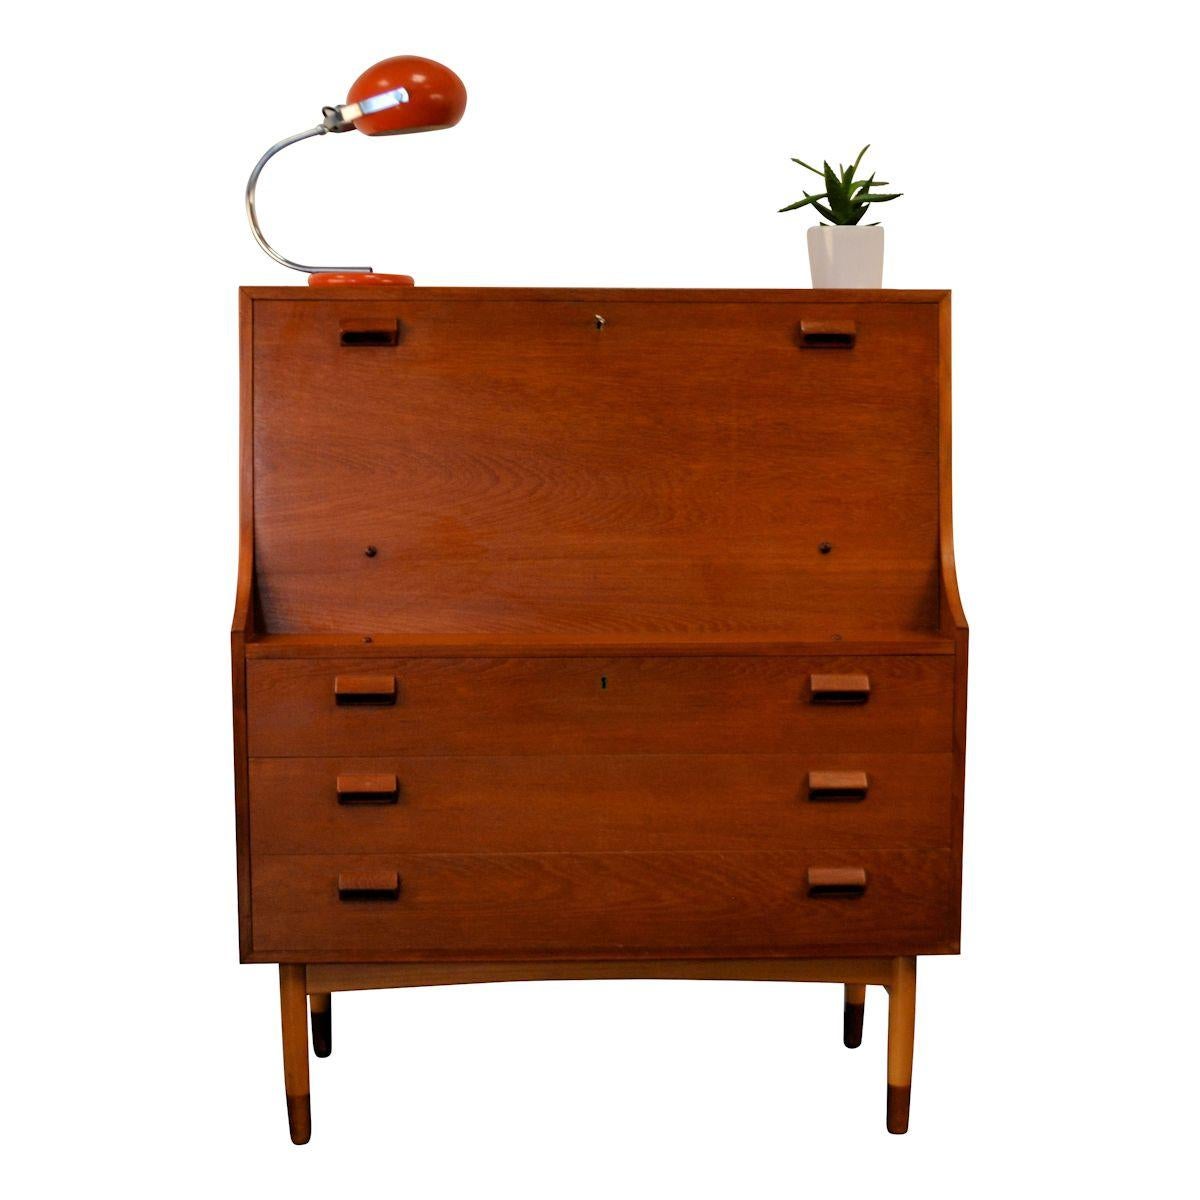 Mid-Century Modern Danish cabinet desk designed Børge Mogensen for Søborg Møbelfabrik in the 1960s. The hinged shelf easily creates a desk area, ample storage space is provided by 3 spacious drawers below the desk area, 2 smaller drawers an storage